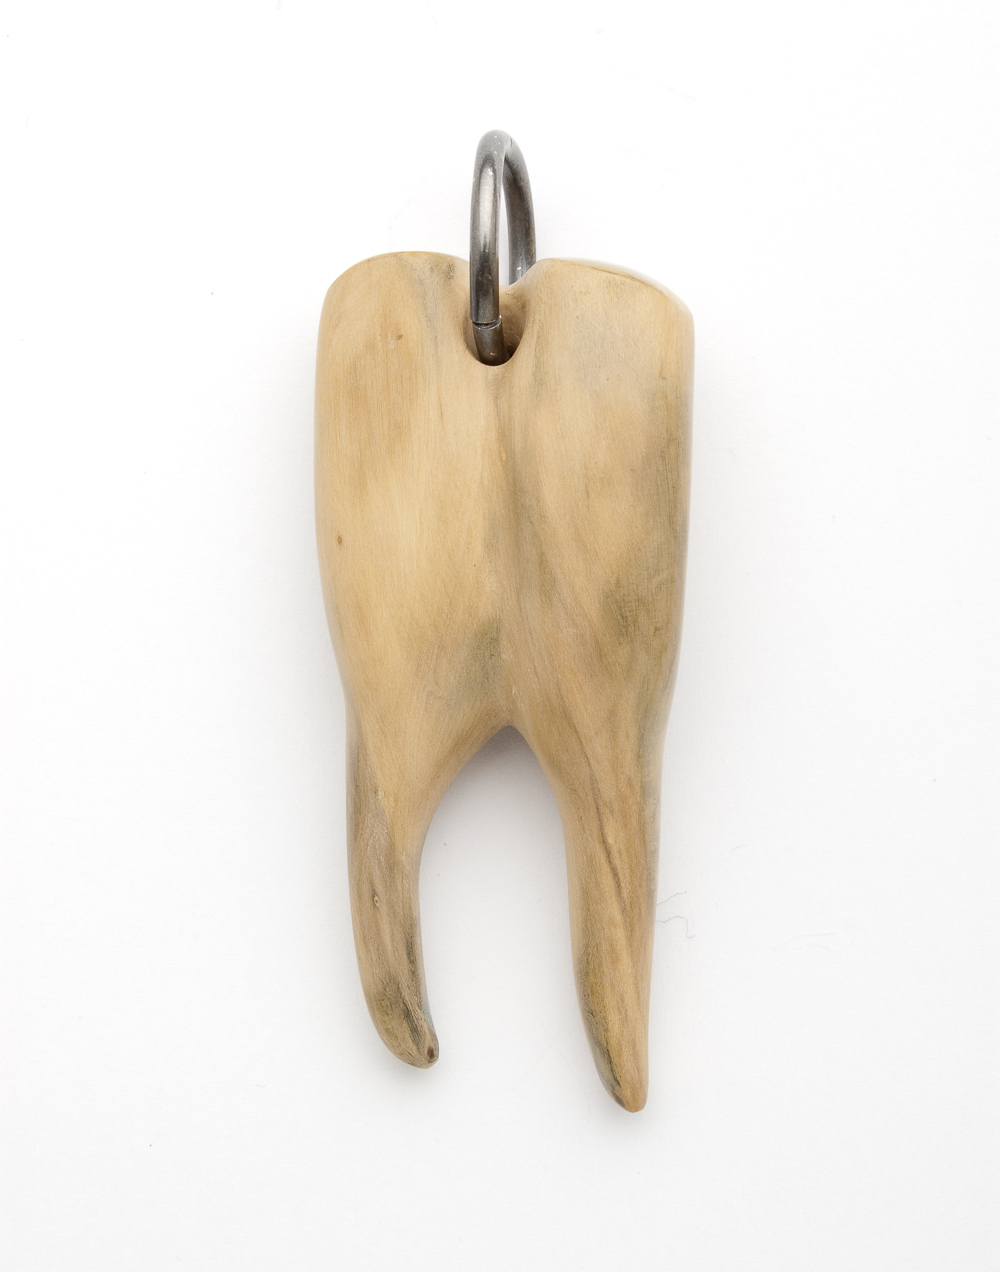 Jane Dodd, 14 Bits, Pendant: Tooth, Boxwood, sterling silver, 8.6 x 3.4 x 2.1 cm